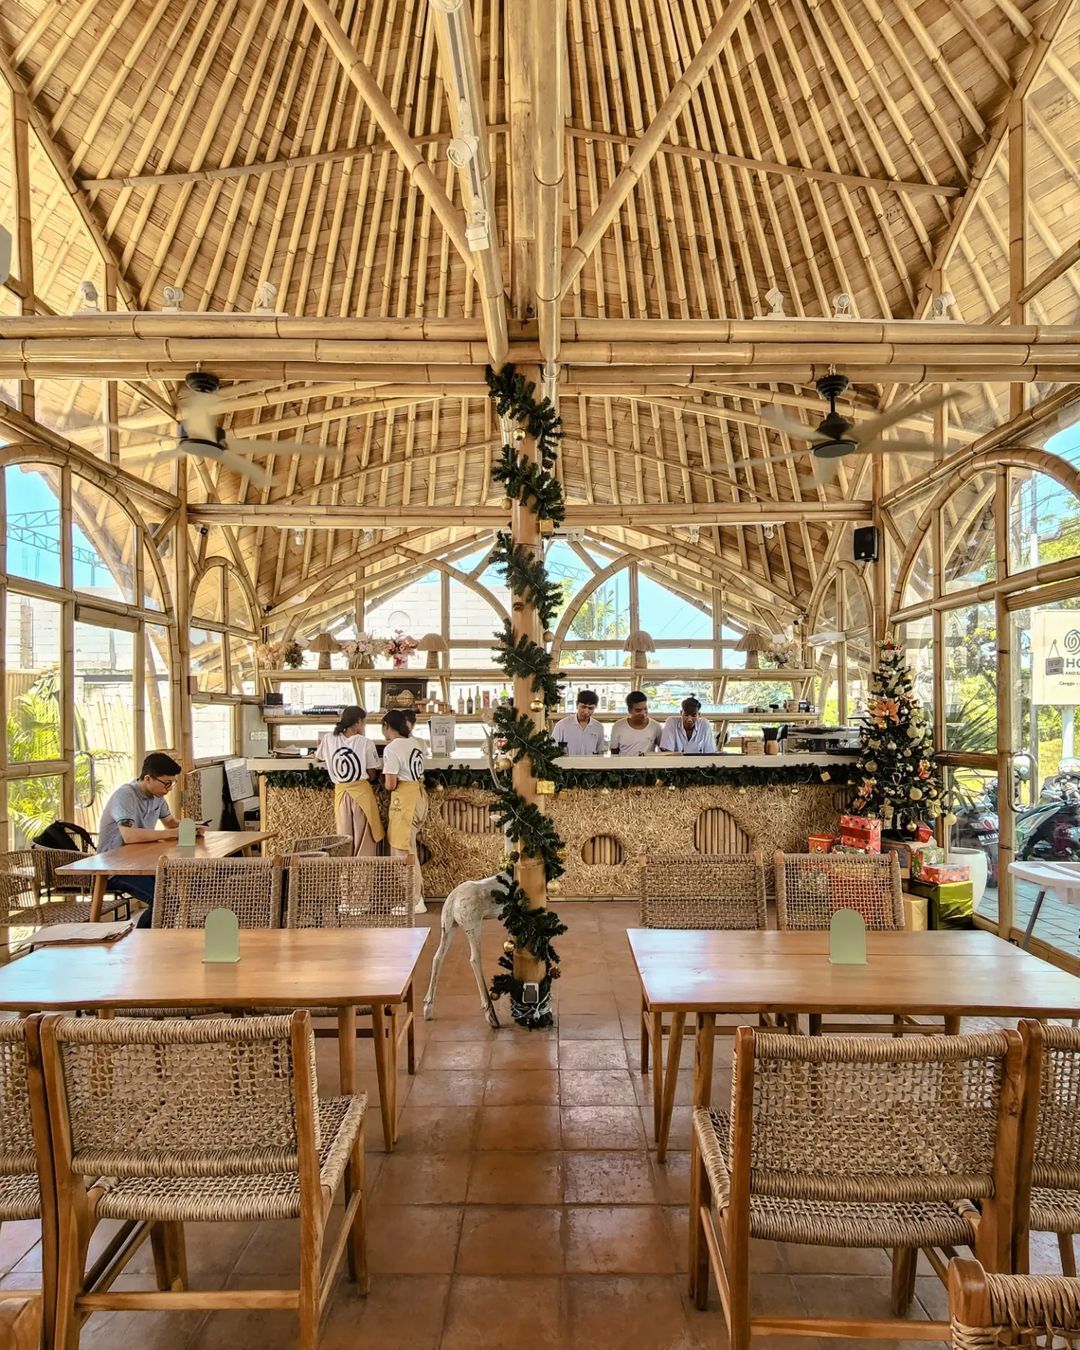 Review Gihon Cafe Eatery Bali Image From @cafedarling